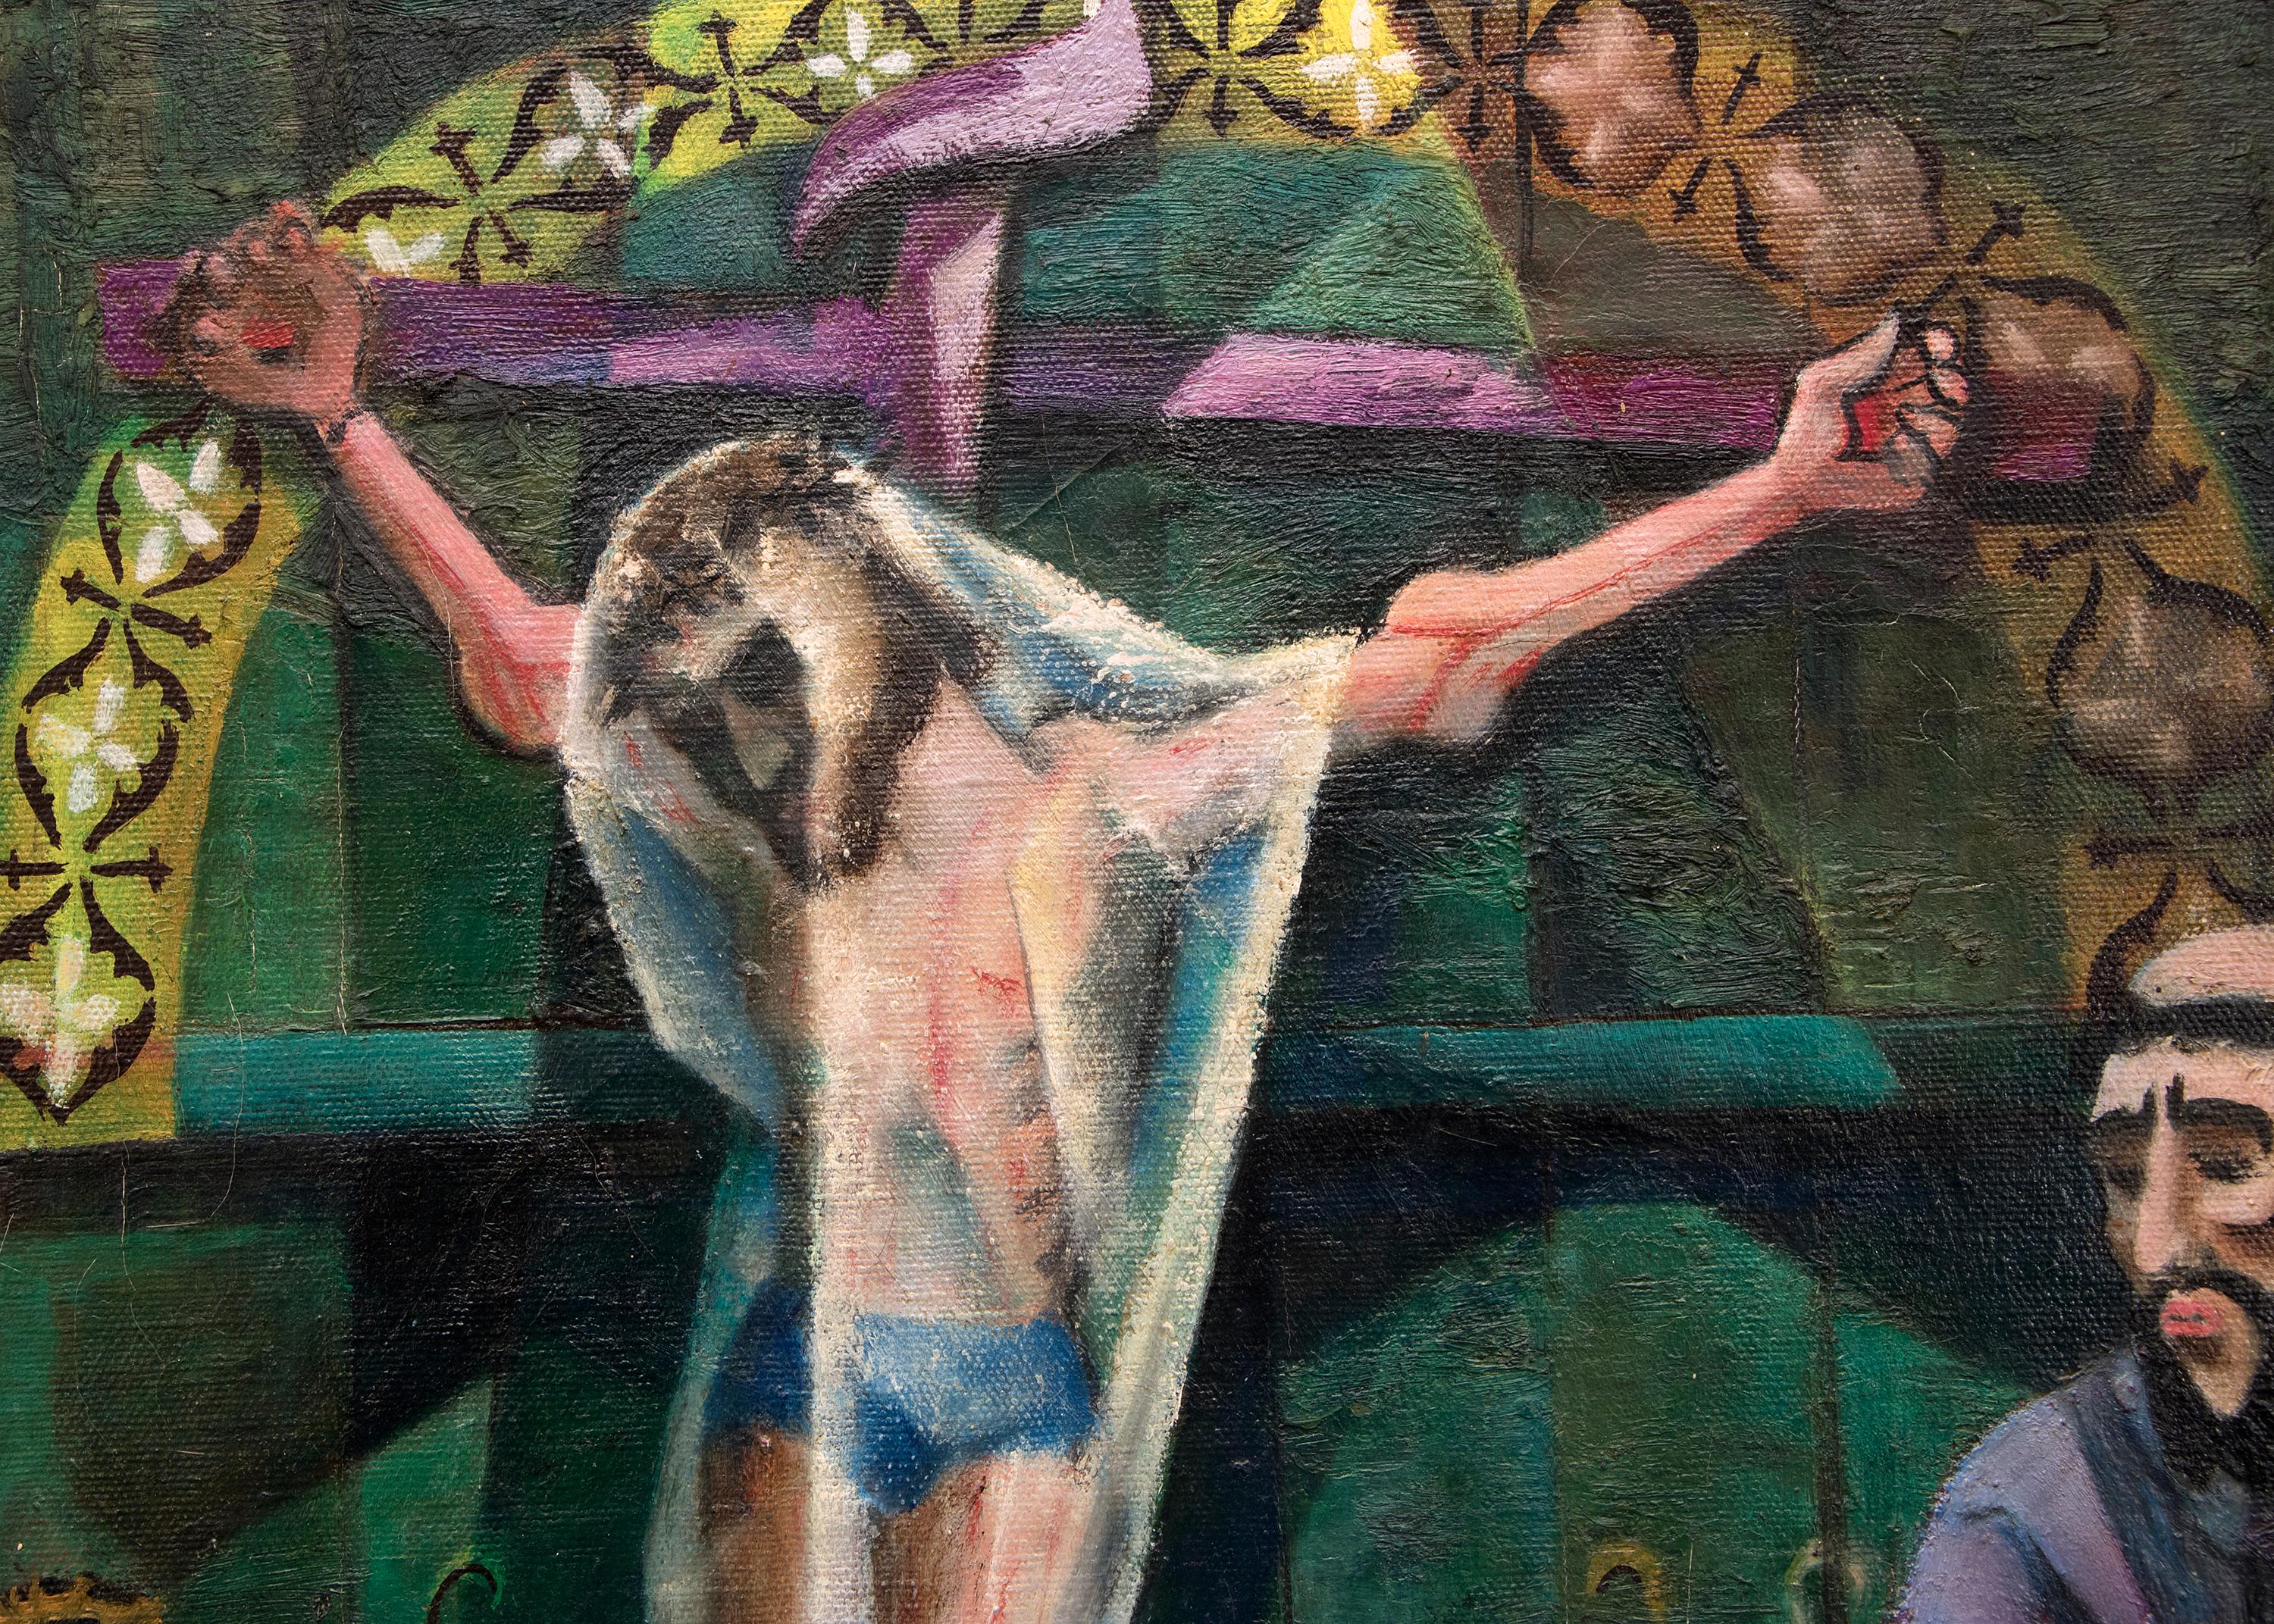 Original devotional oil painting signed and dated by Charles Stewart (1922-2011) of an church altar in Trampas, New Mexico, painted in 1950, with the Crucifixion painted in a modernist/Spanish Colonial style. Presented in a vintage frame, outer